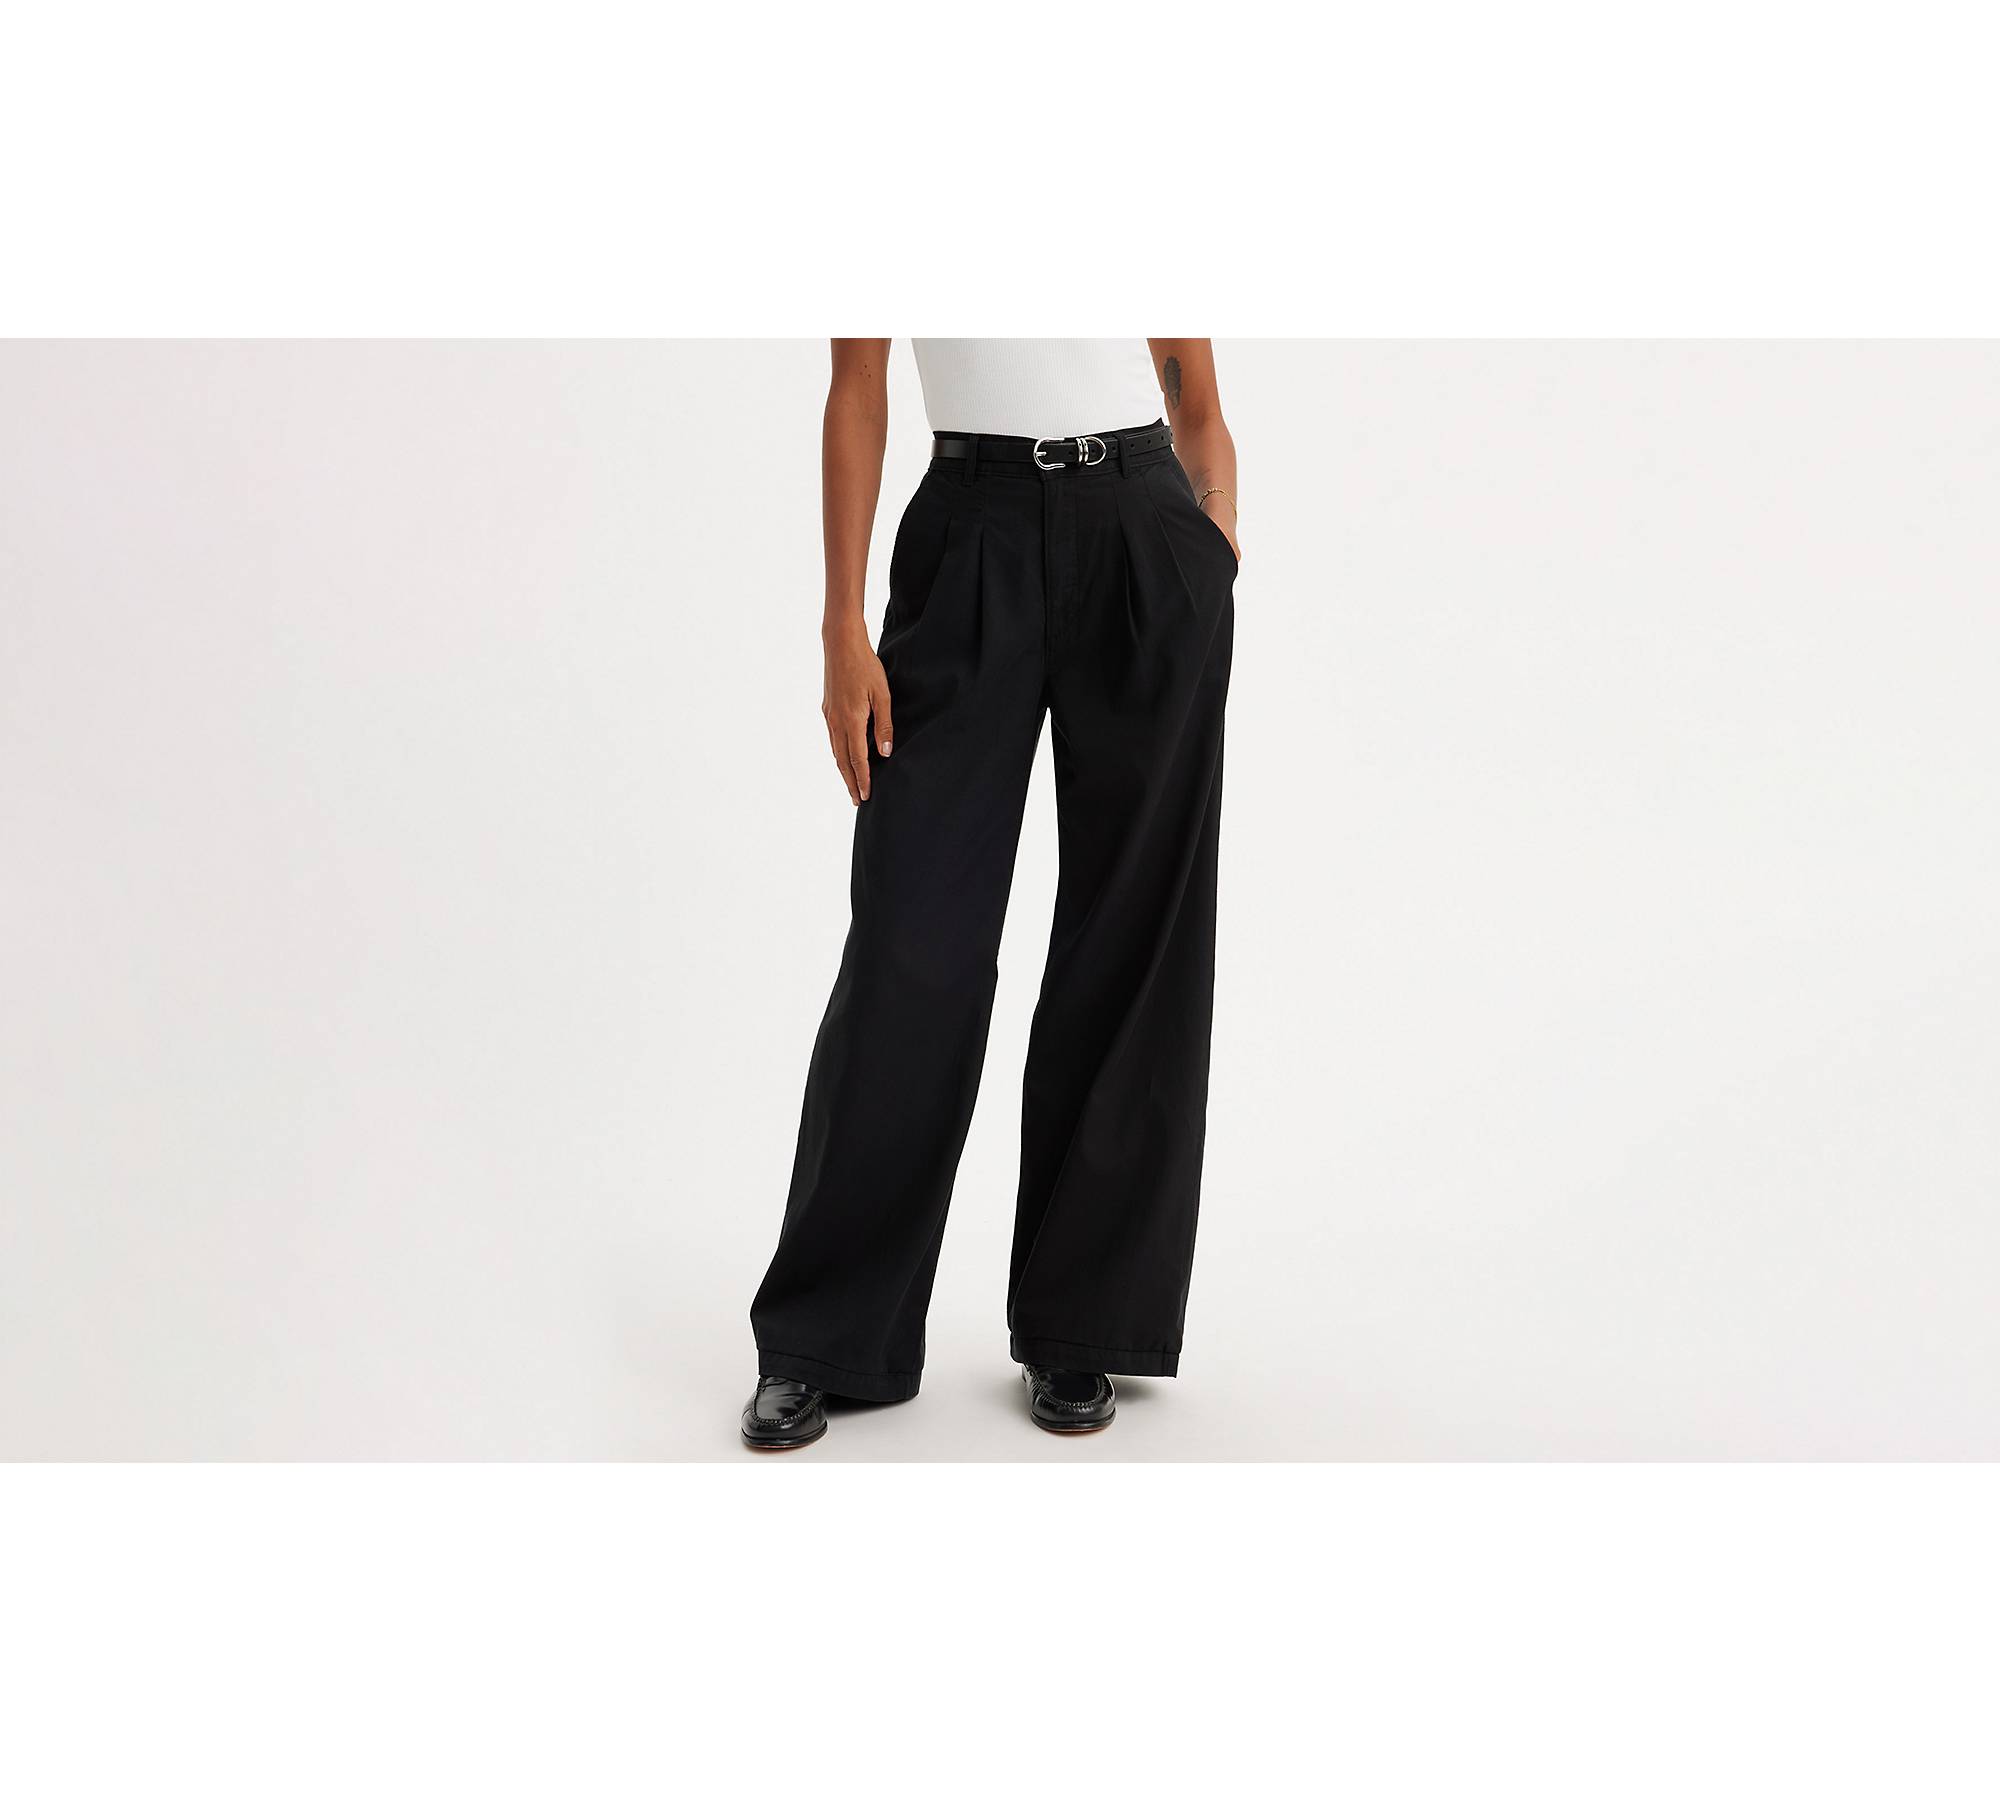 Buy Lastinch Women's Plus Size Viscose Black Pleated Trouser with